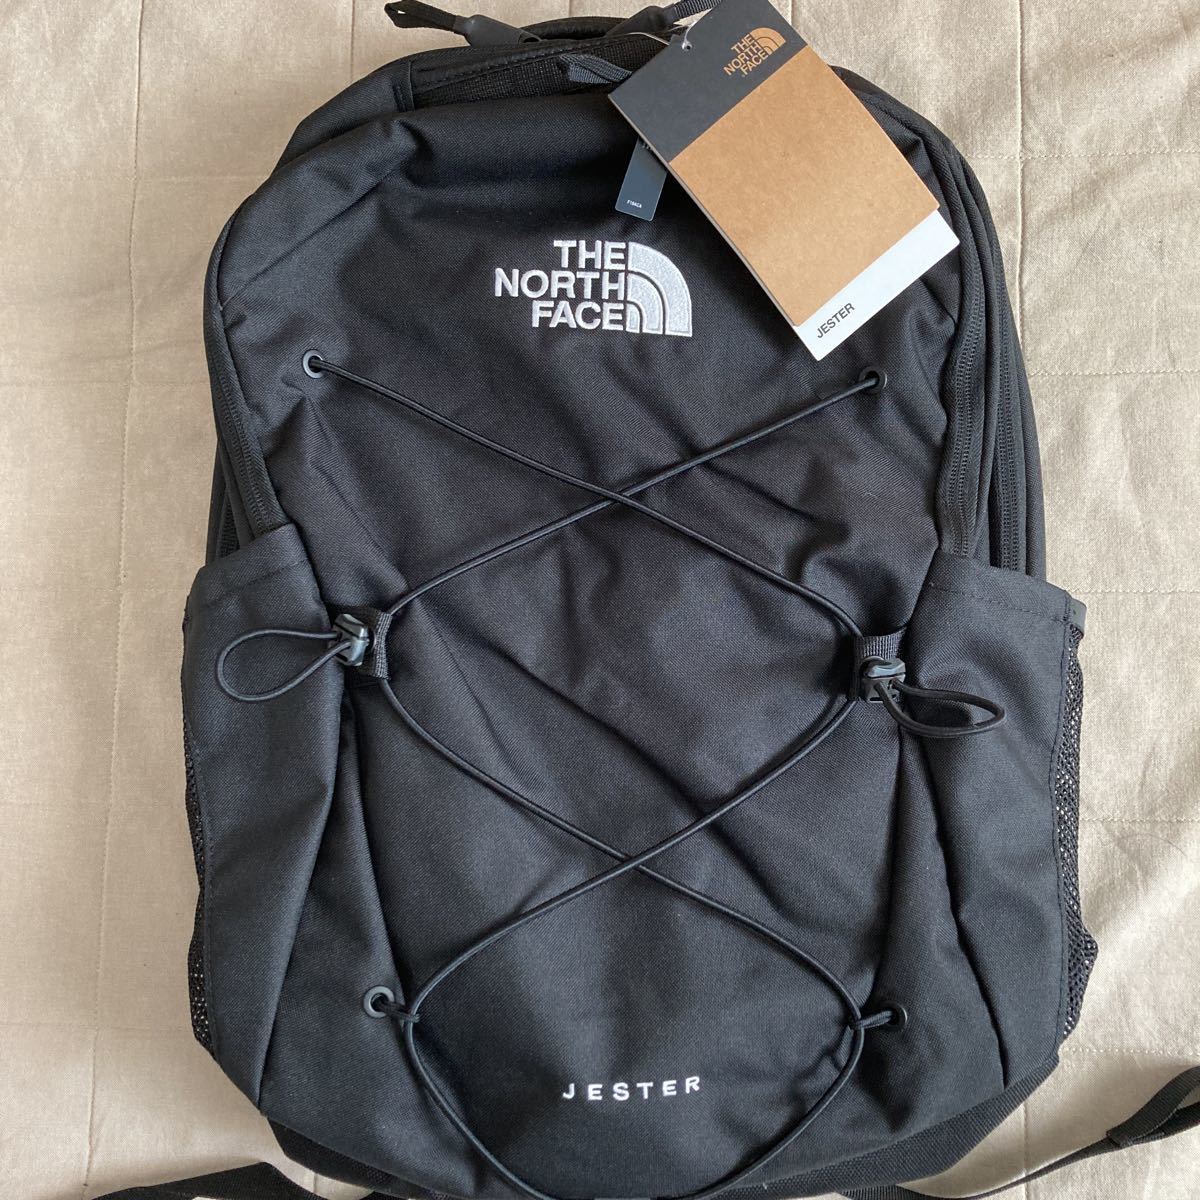 THE NORTH FACE ノースフェイス☆JESTER ジェスター☆BACKPACK バックパック リュック☆27リットル 黒☆新品☆送料込み